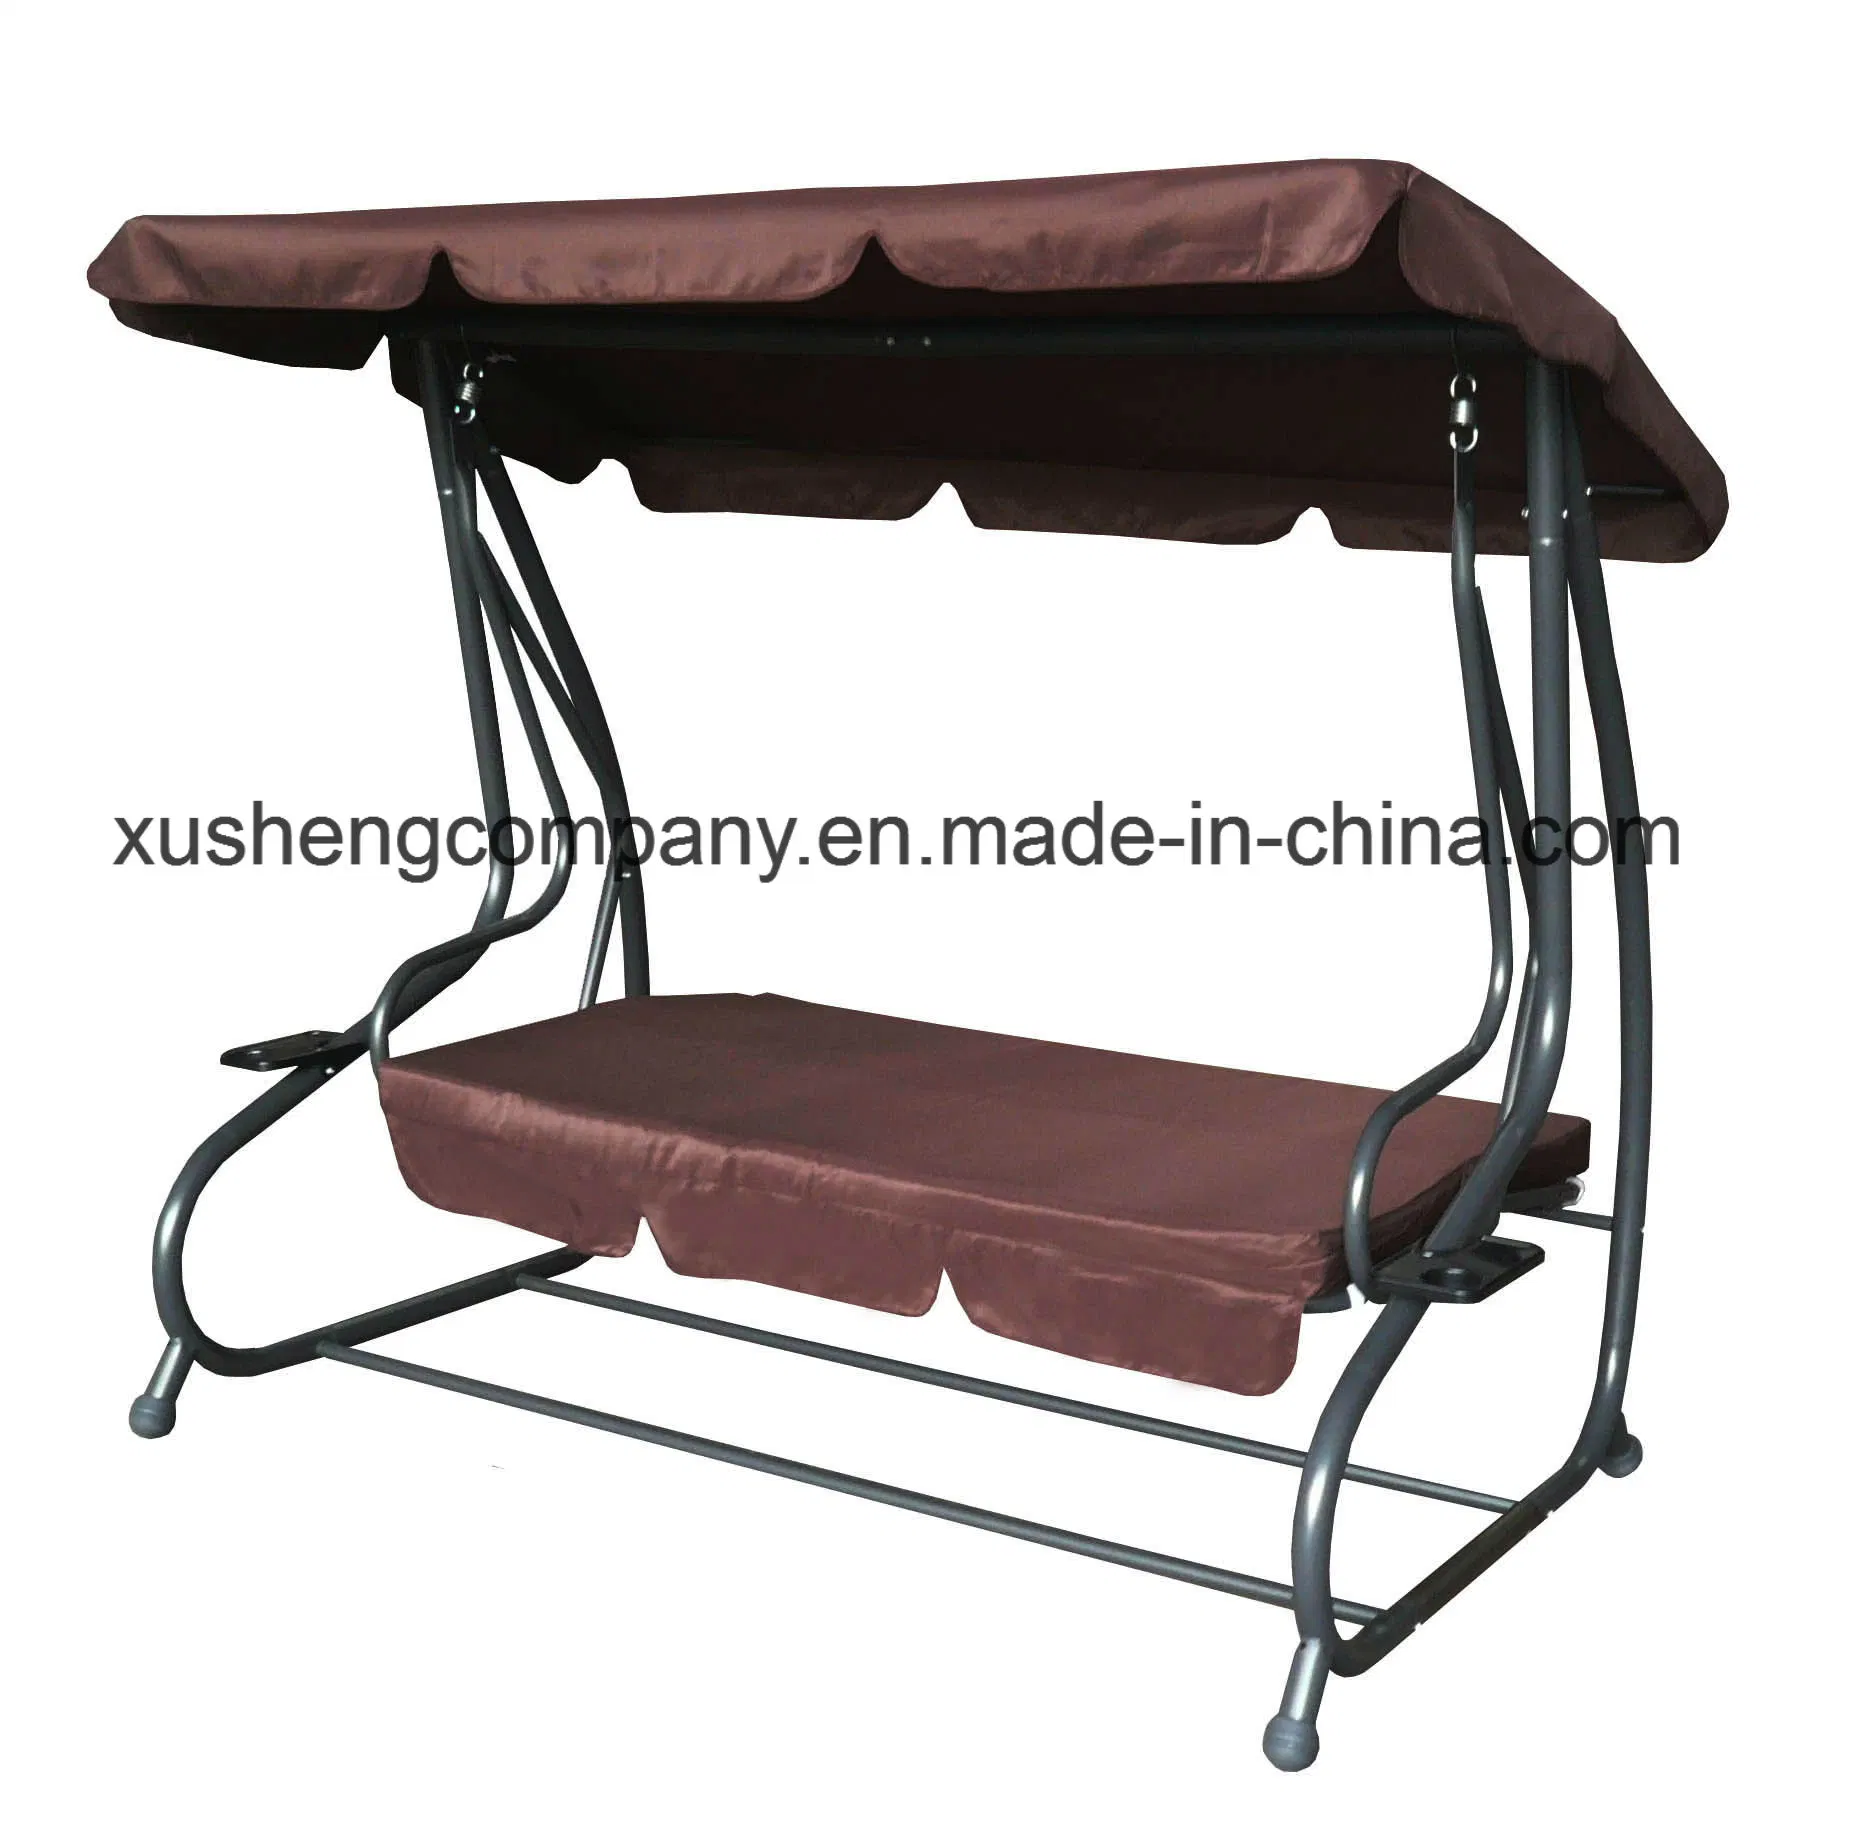 High quality/High cost performance Patio Leisure Swing Chair Garden Chair